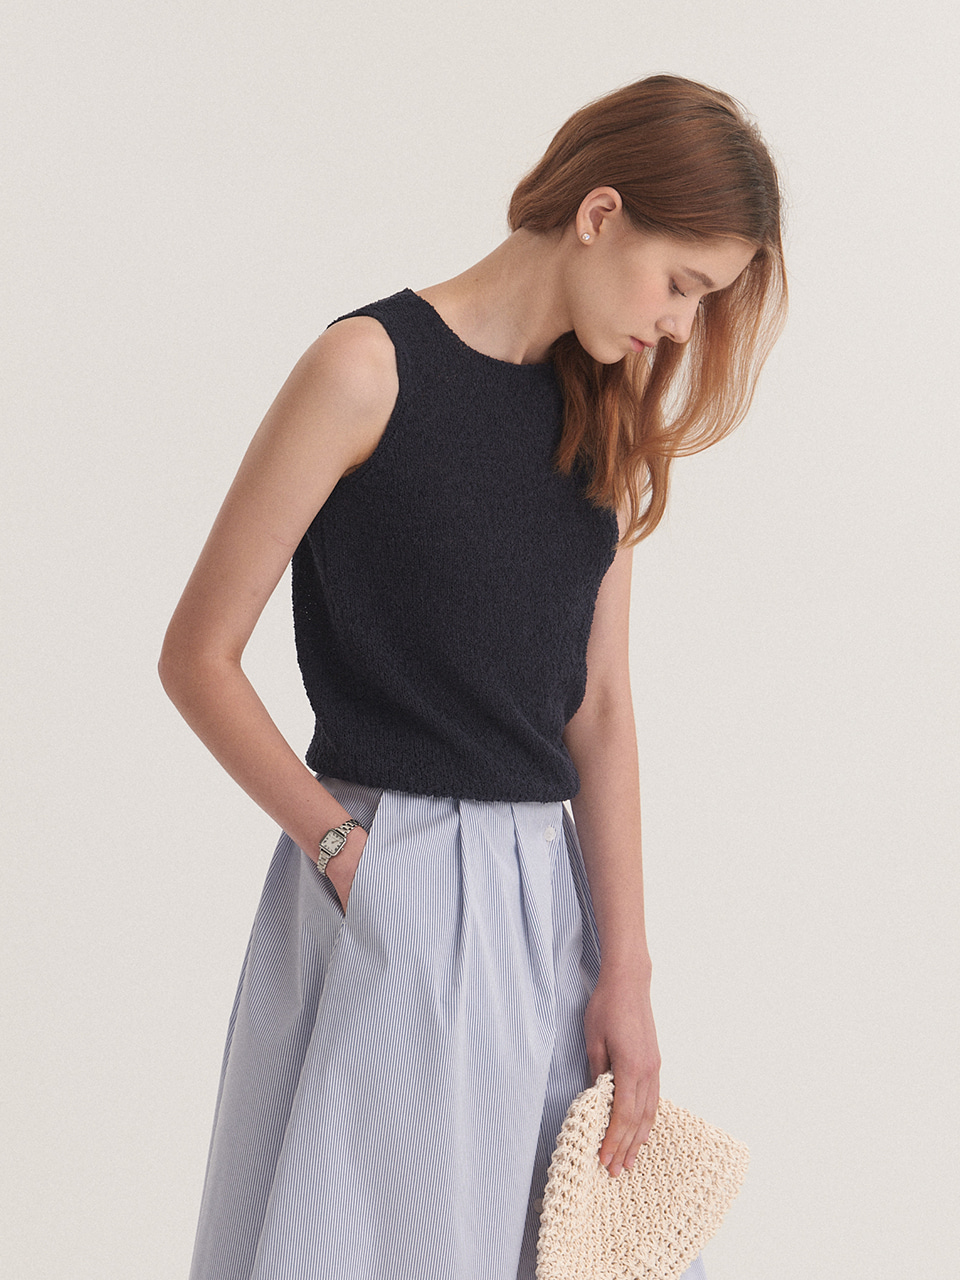 Round Sleeveless Knit_2color